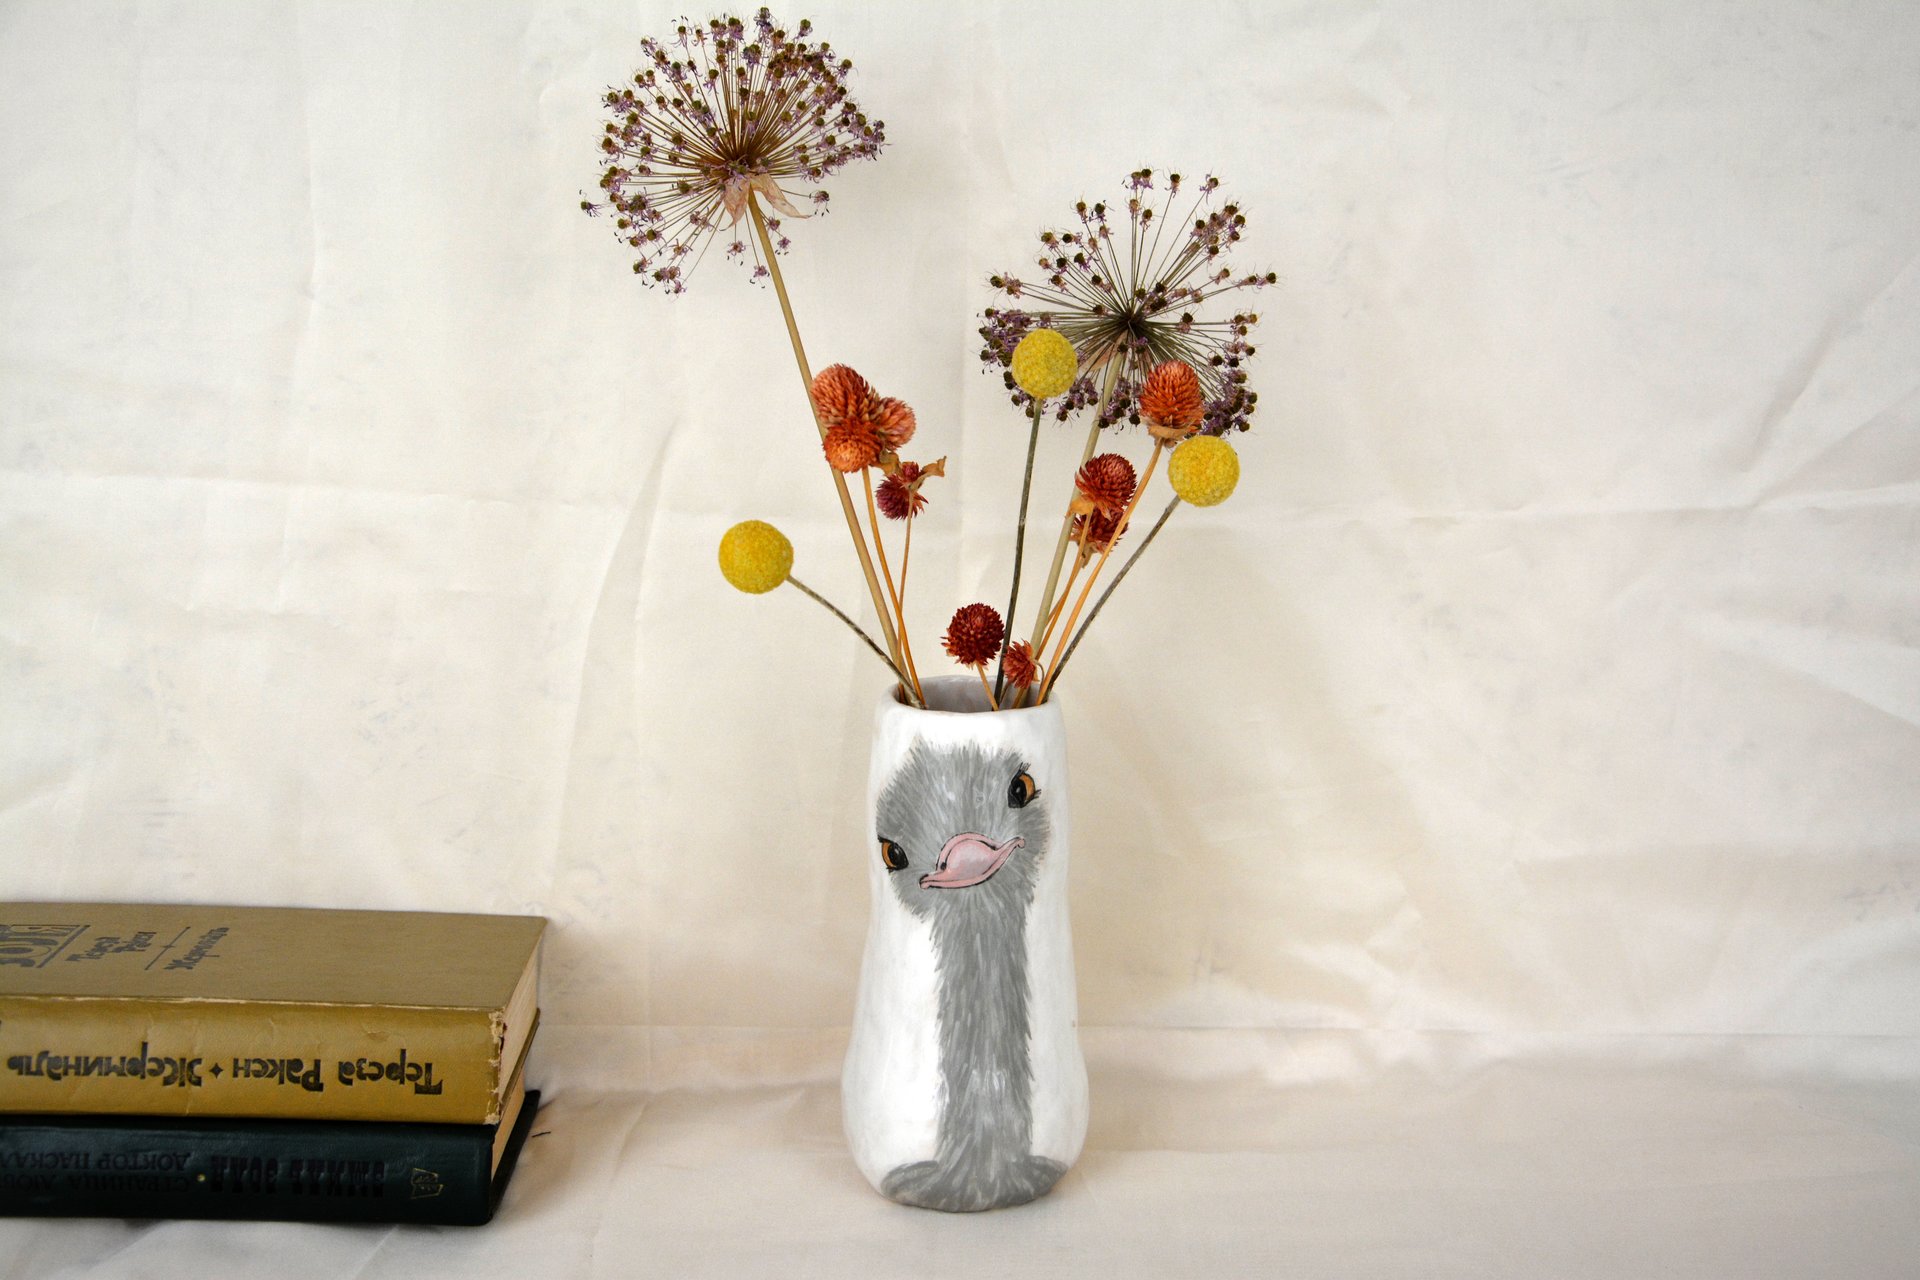 Hand-painted vase — Curious Ostrich, height - 18 cm, photo 4 of 4. 569.